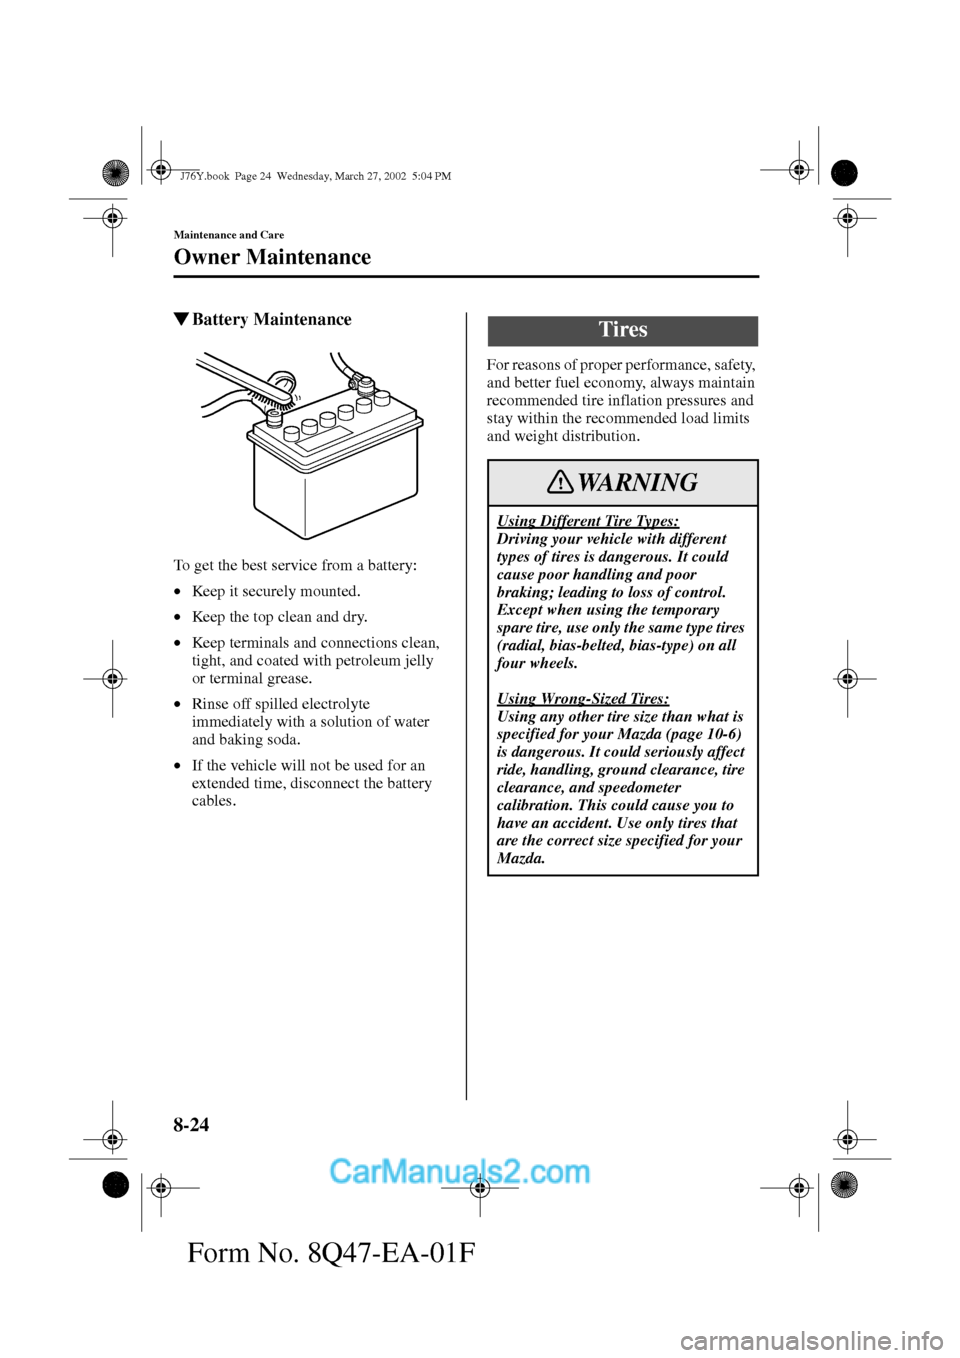 MAZDA MODEL MILLENIA 2002   (in English) Owners Guide 8-24
Maintenance and Care
Owner Maintenance
Form No. 8Q47-EA-01F
Battery Maintenance
To get the best service from a battery:
•Keep it securely mounted.
•Keep the top clean and dry.
•Keep termin